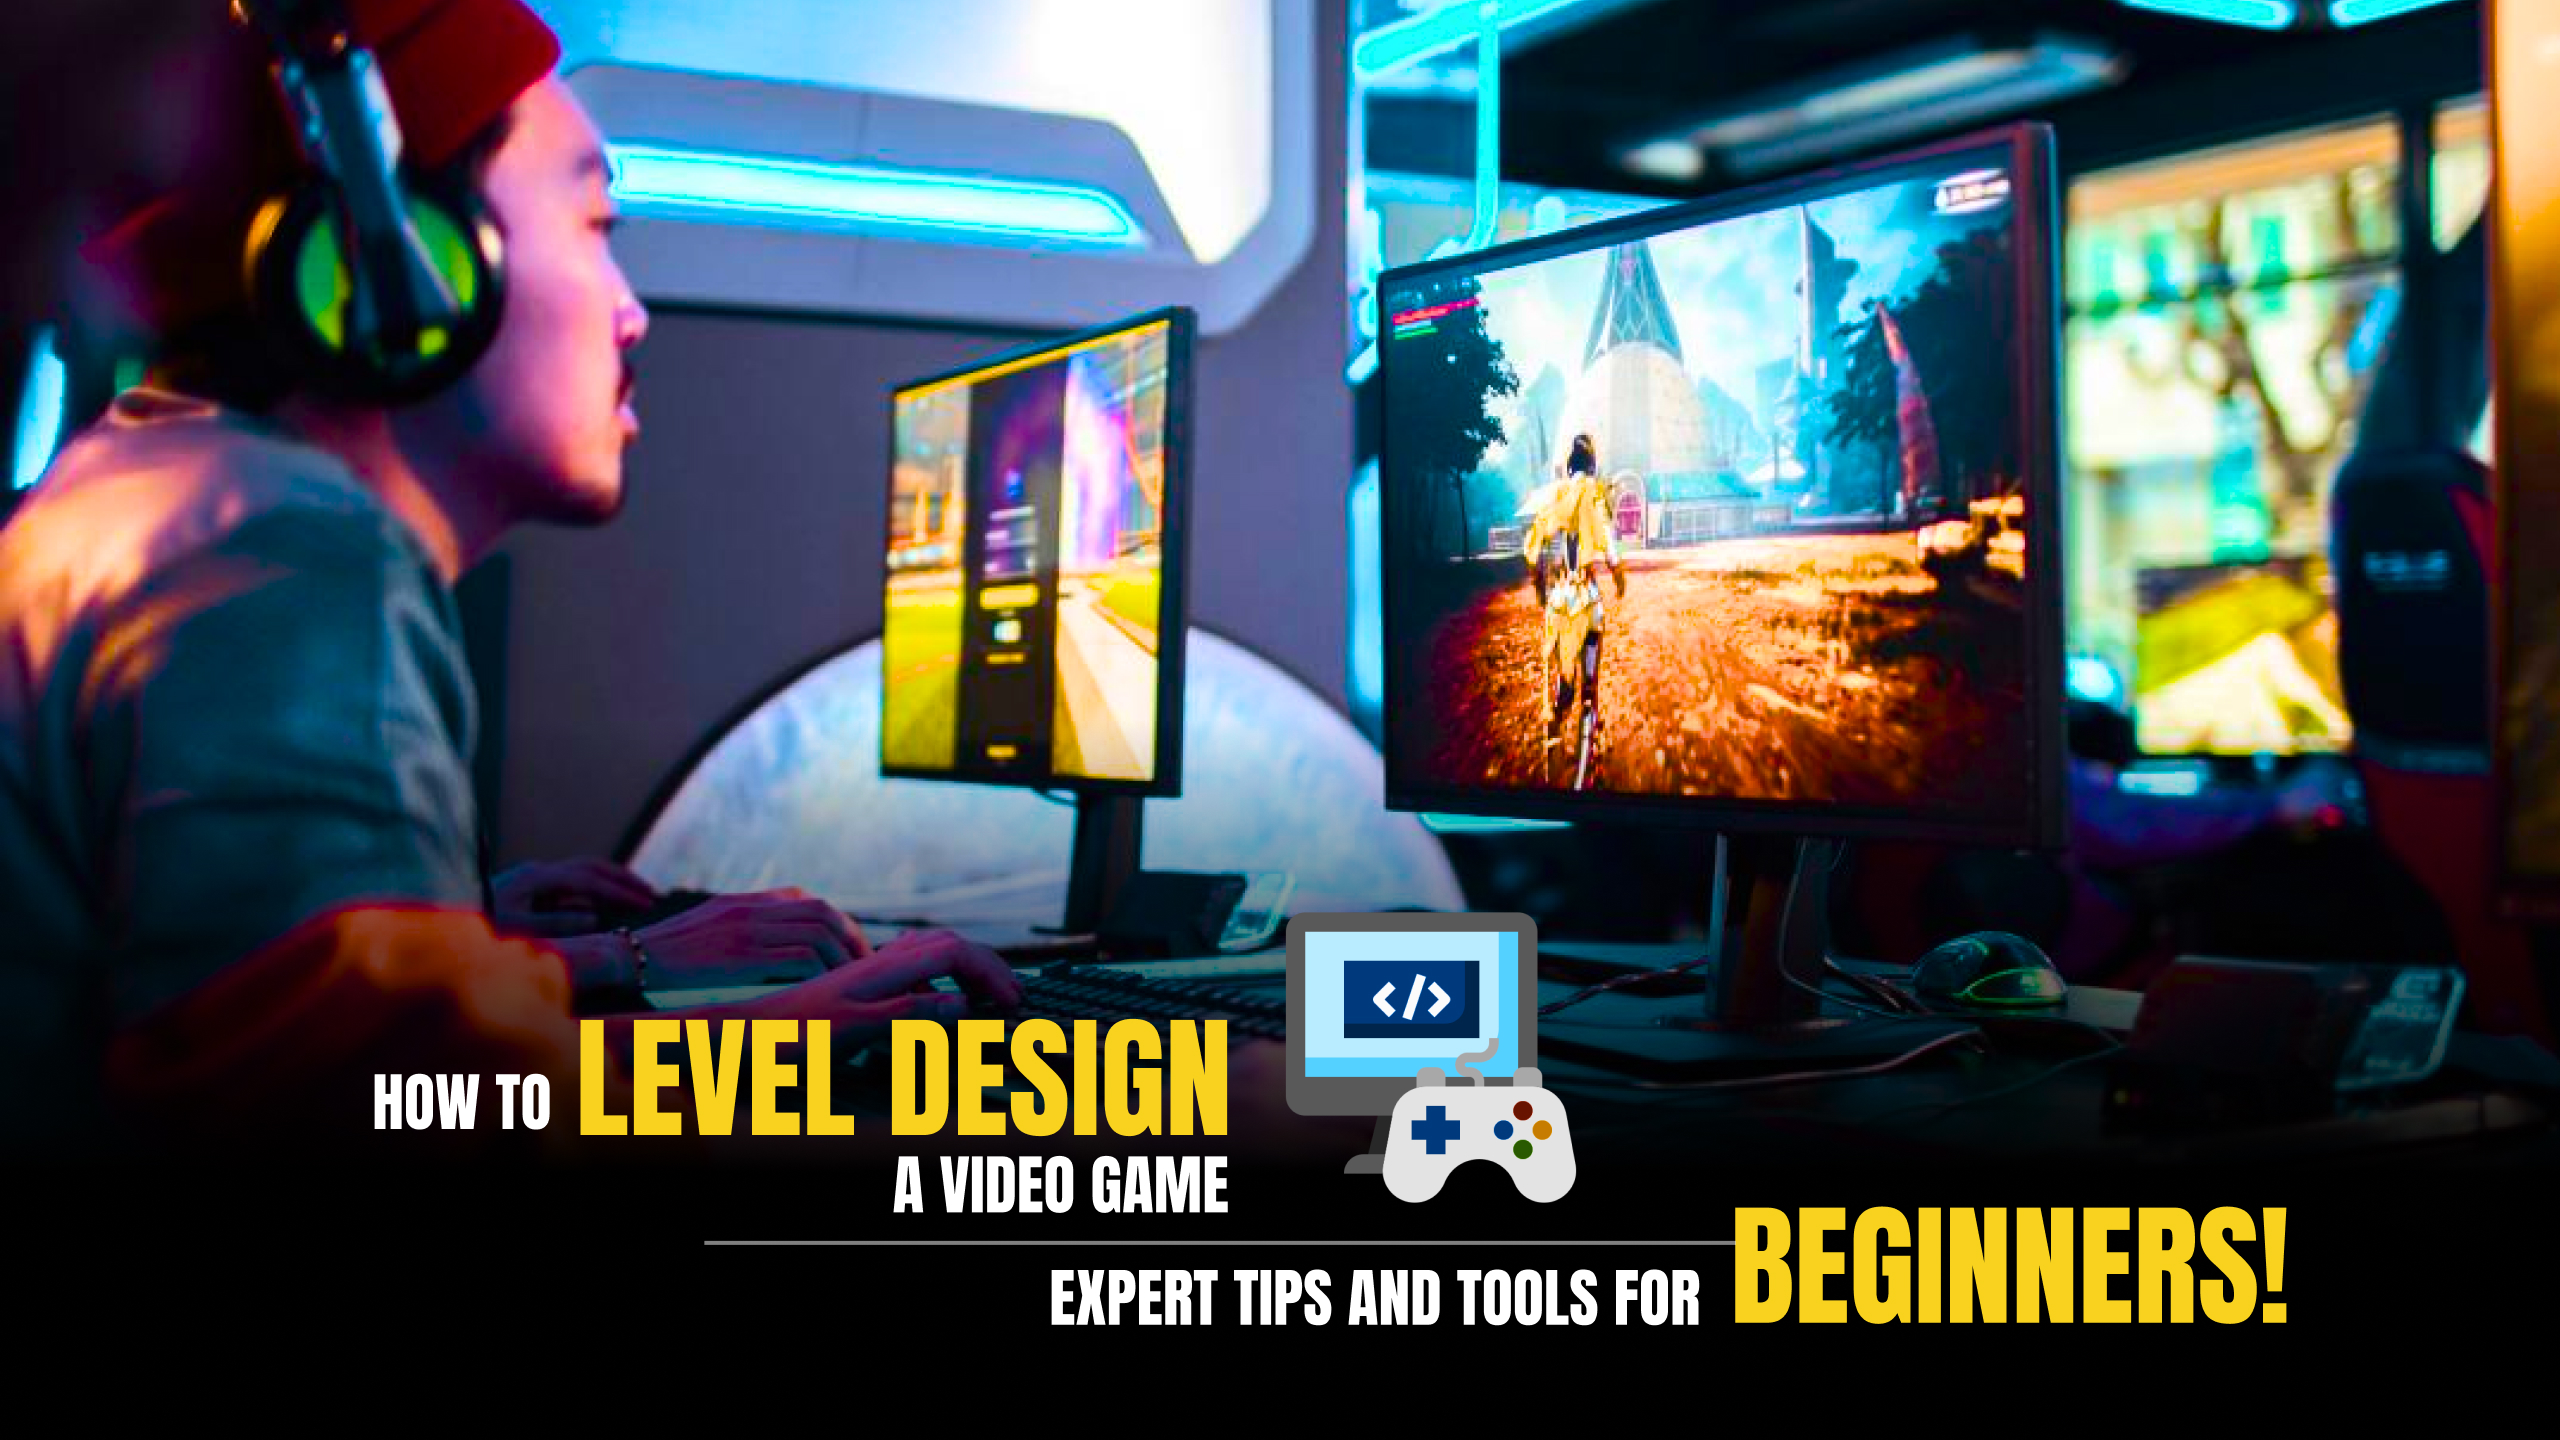 Game level desig expert tips and tools for beginners